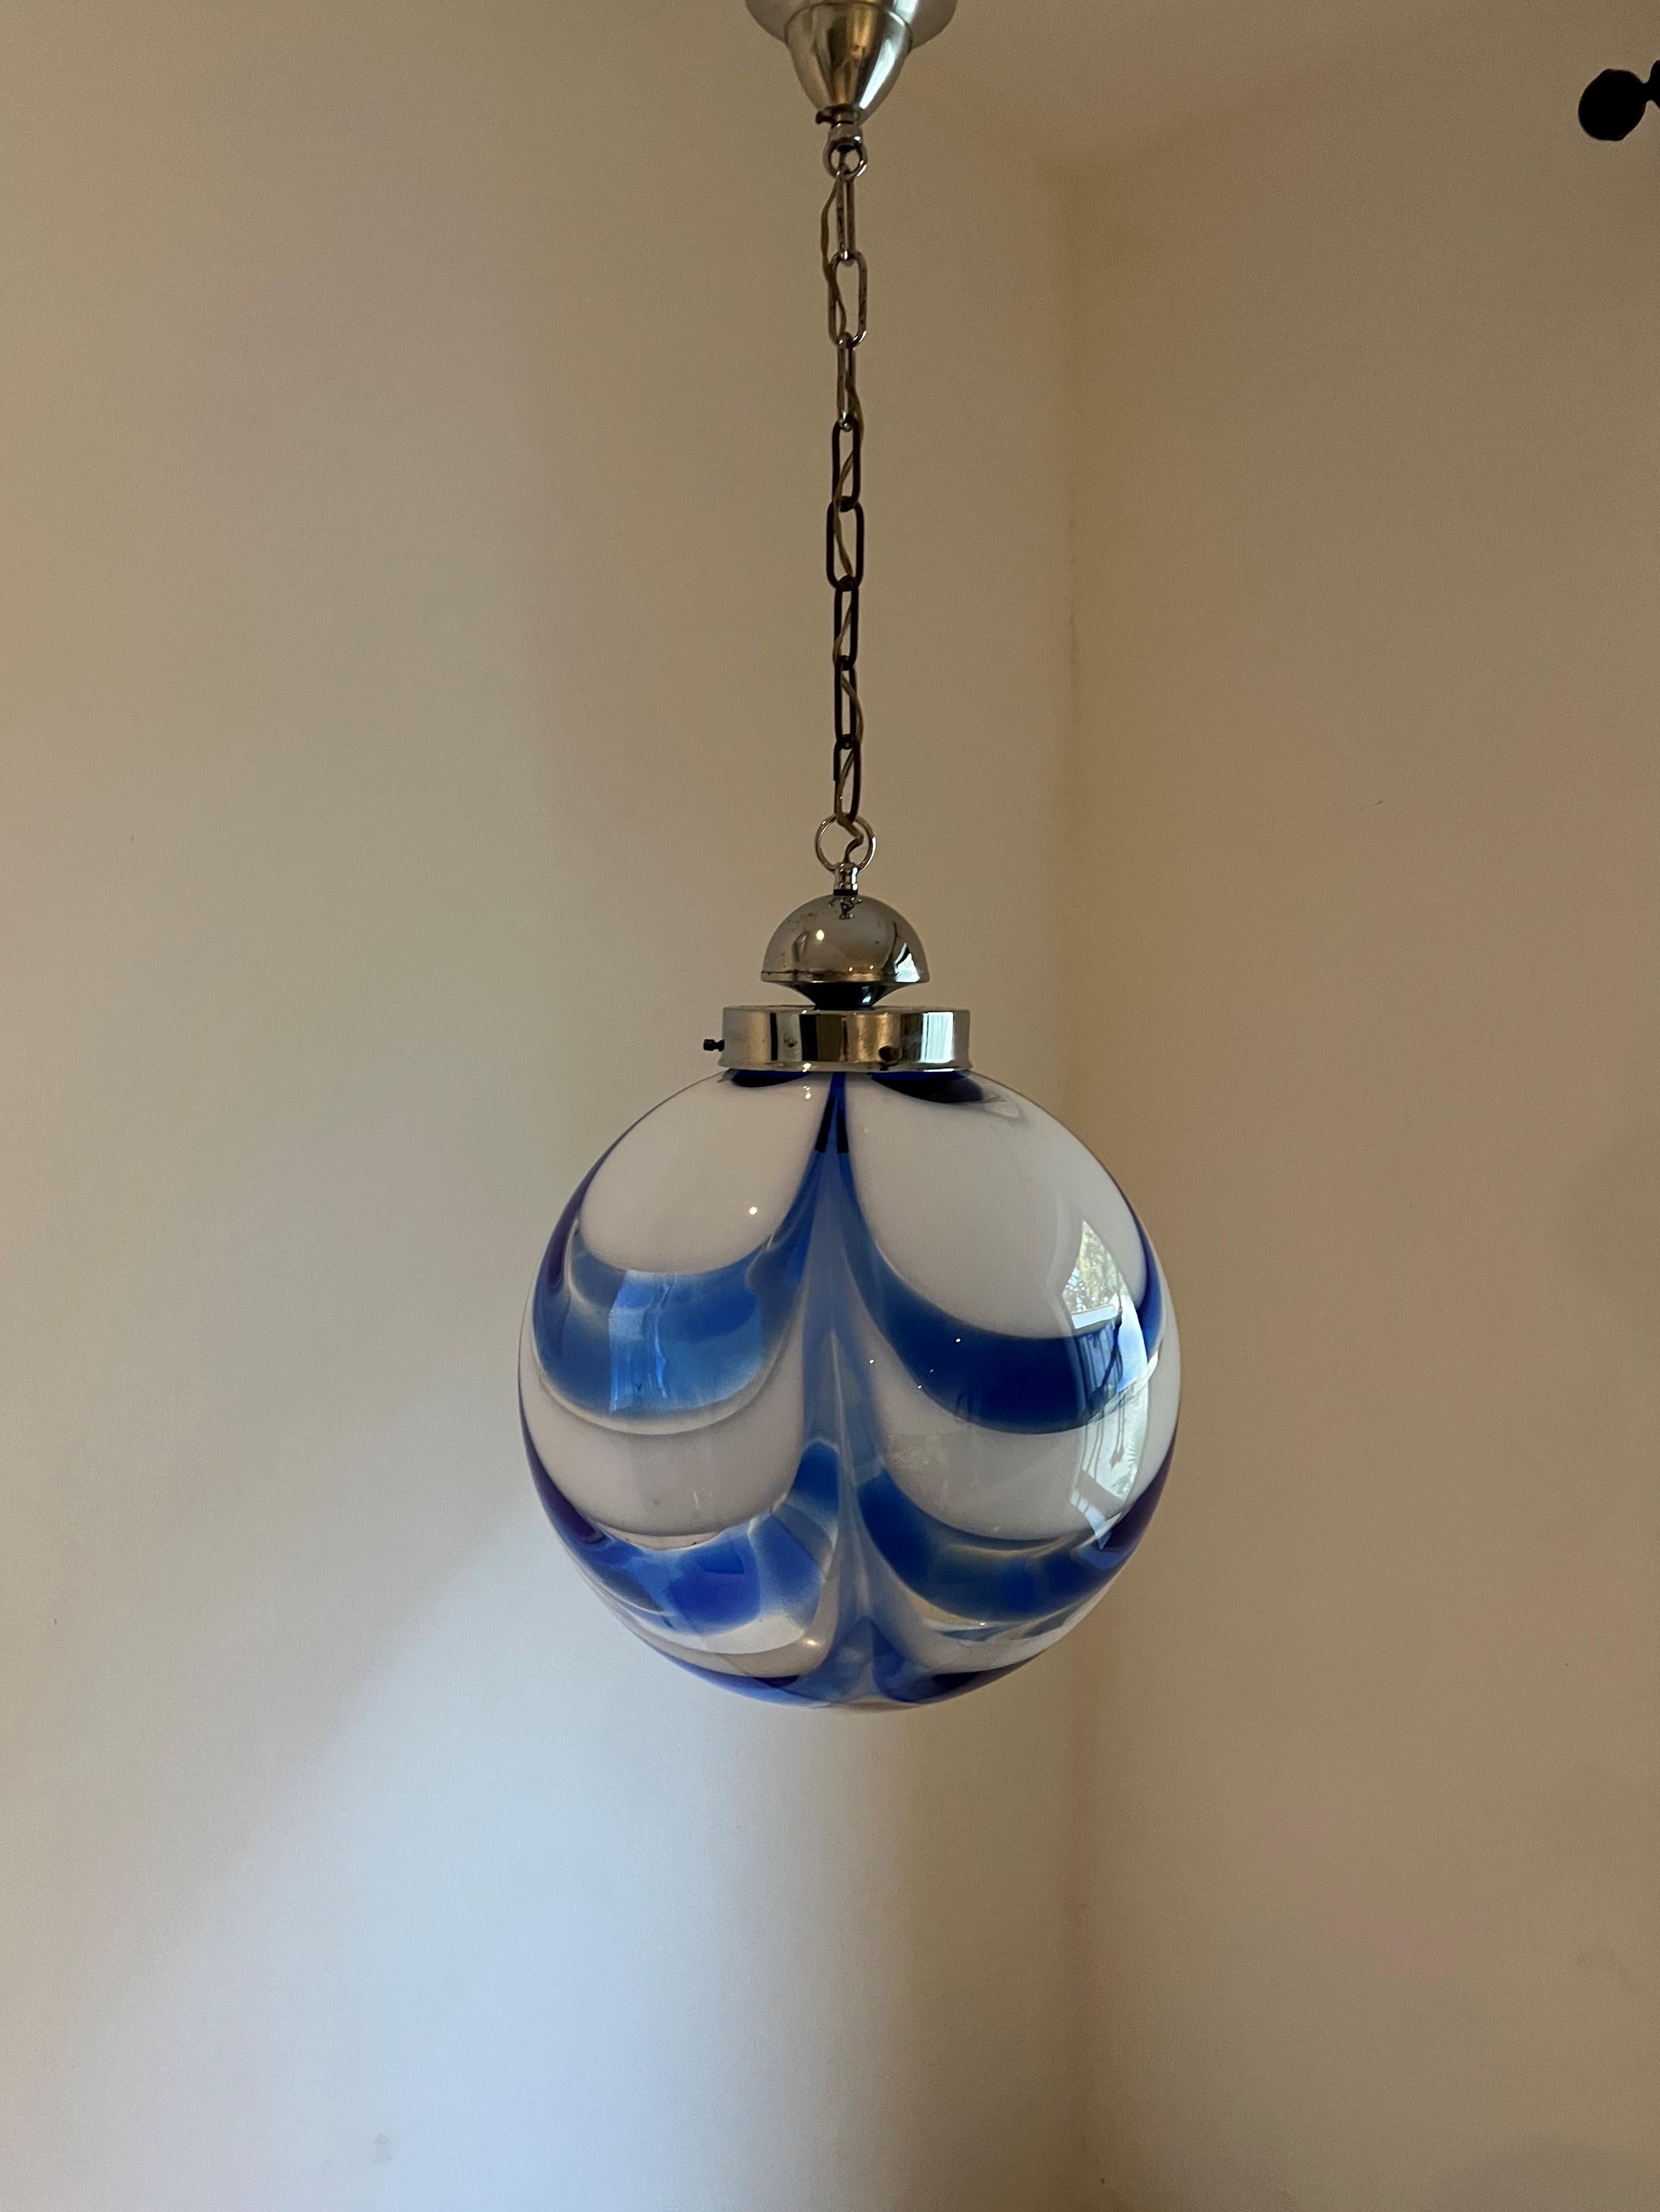 Space Age pendant light manufactured in white and blue swirled hand blown Murano glass, attributed to Mazzega, circa 1970.
Measures: Diameter is cm.
Height is 110 cm but can be easily adjusted to Measure.